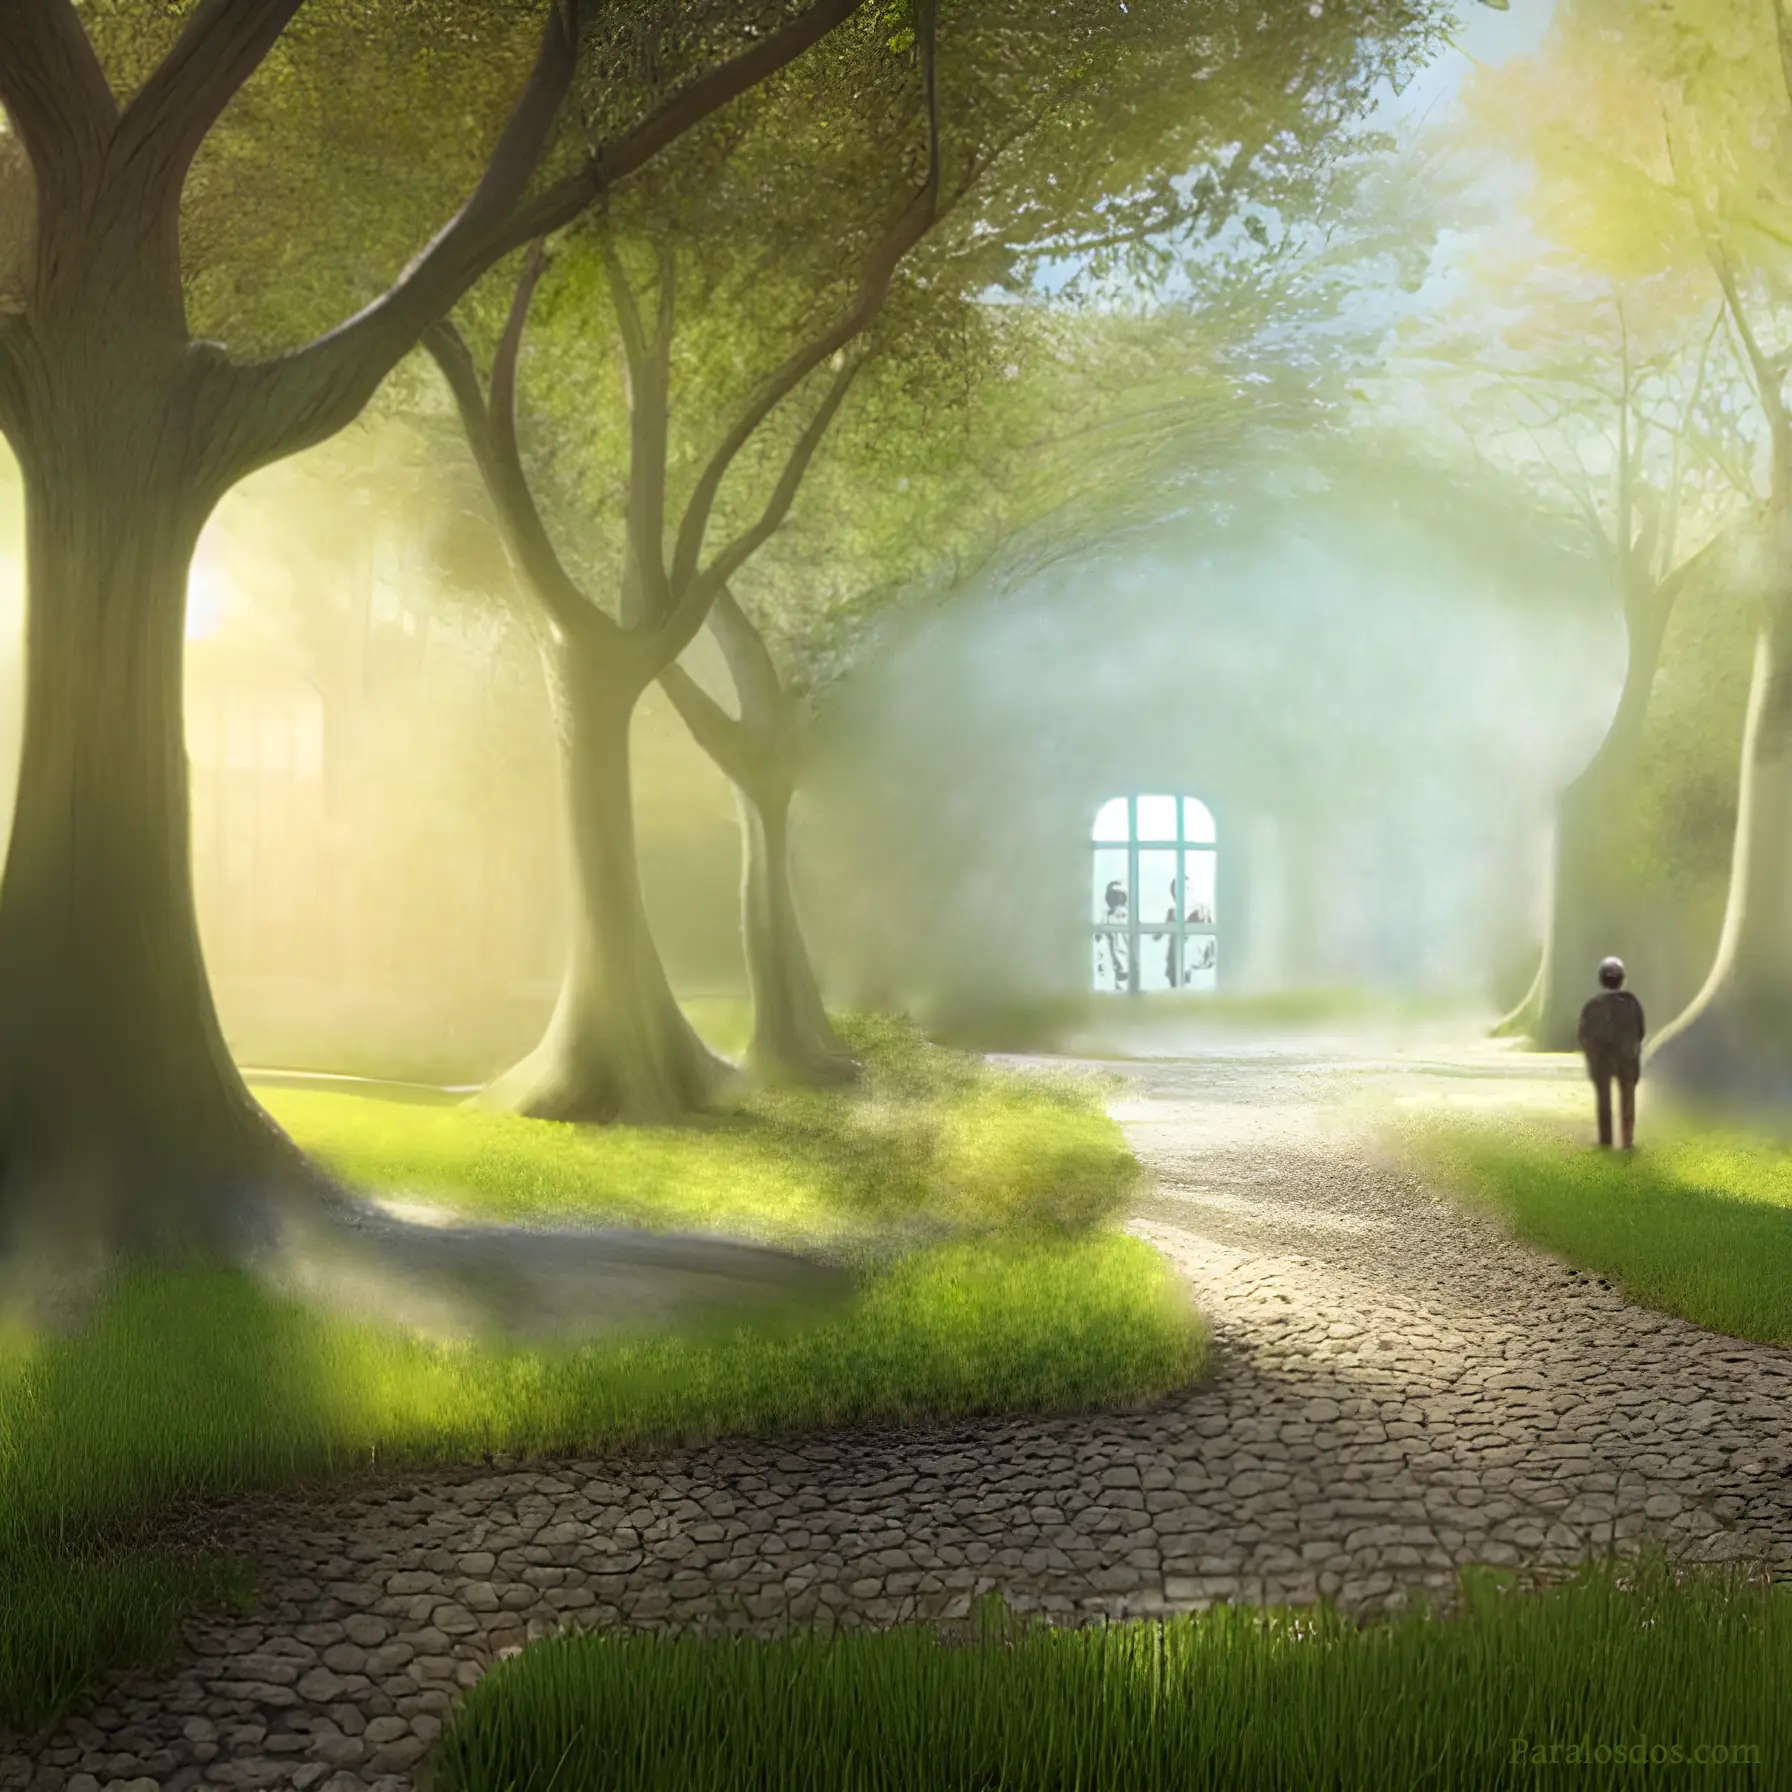 An artistic rendering of a path in a wooded garden leading to a backlit window in a mist. There is a figure just off the path moving towards the window.